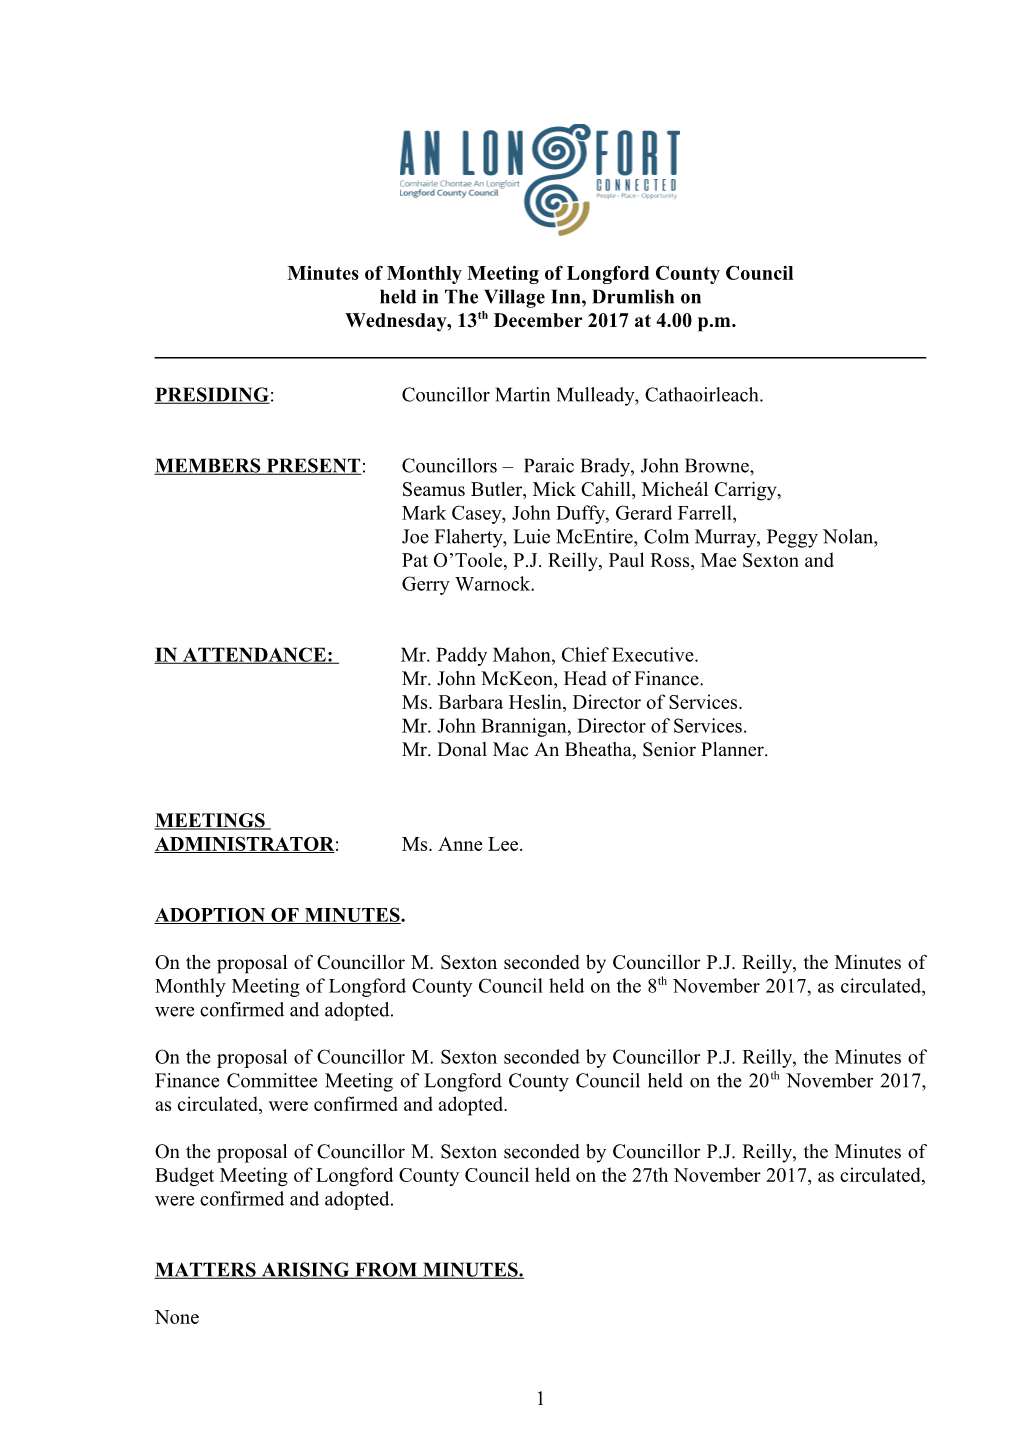 Minutes Ofmonthlymeeting of Longford County Council